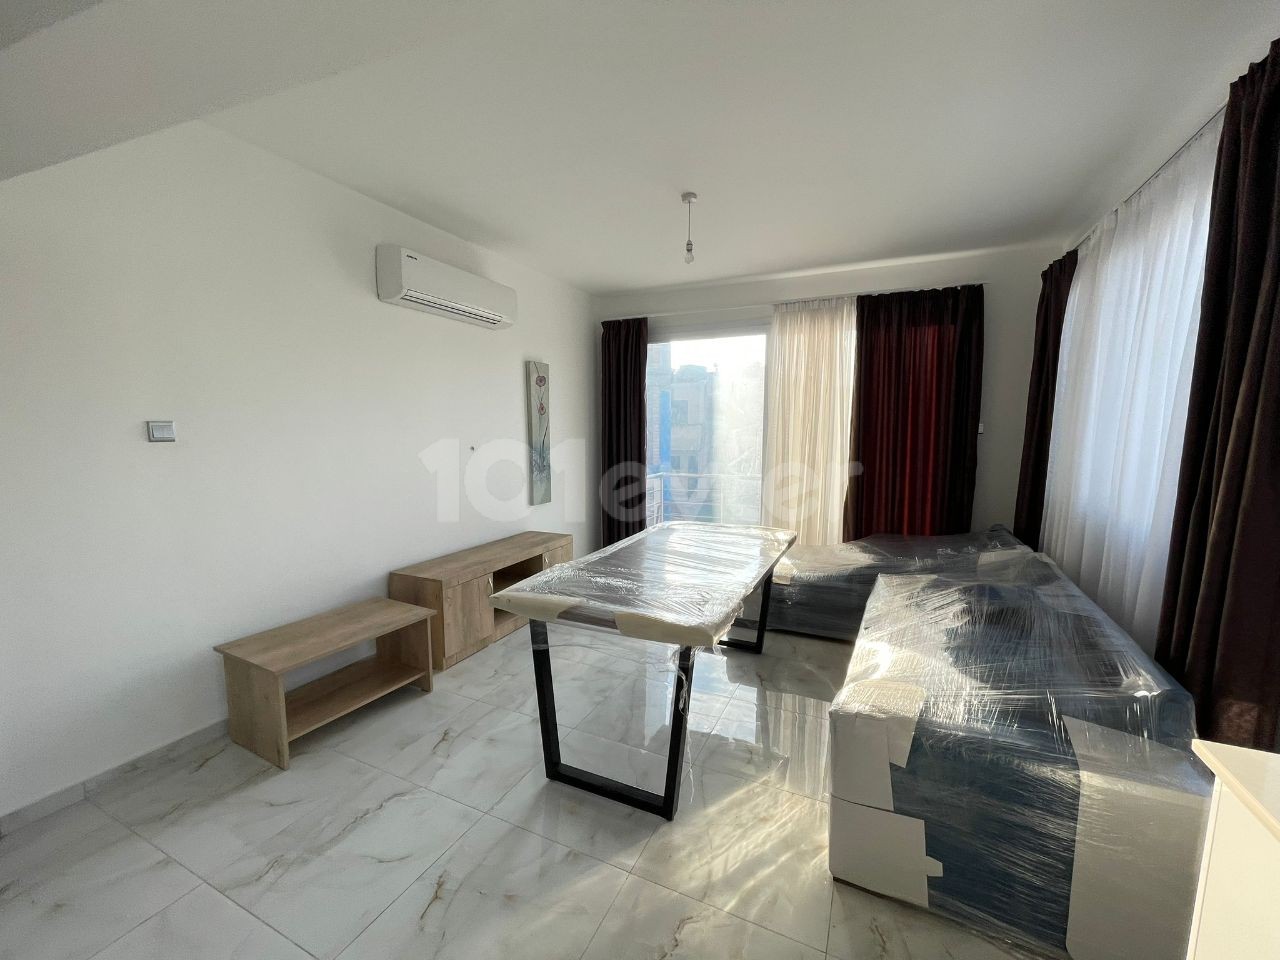 Newly Finished 2+1 Corner Flat FOR SALE with White Furnishings, Walking Distance to the Bus Stop in Gönyeli!